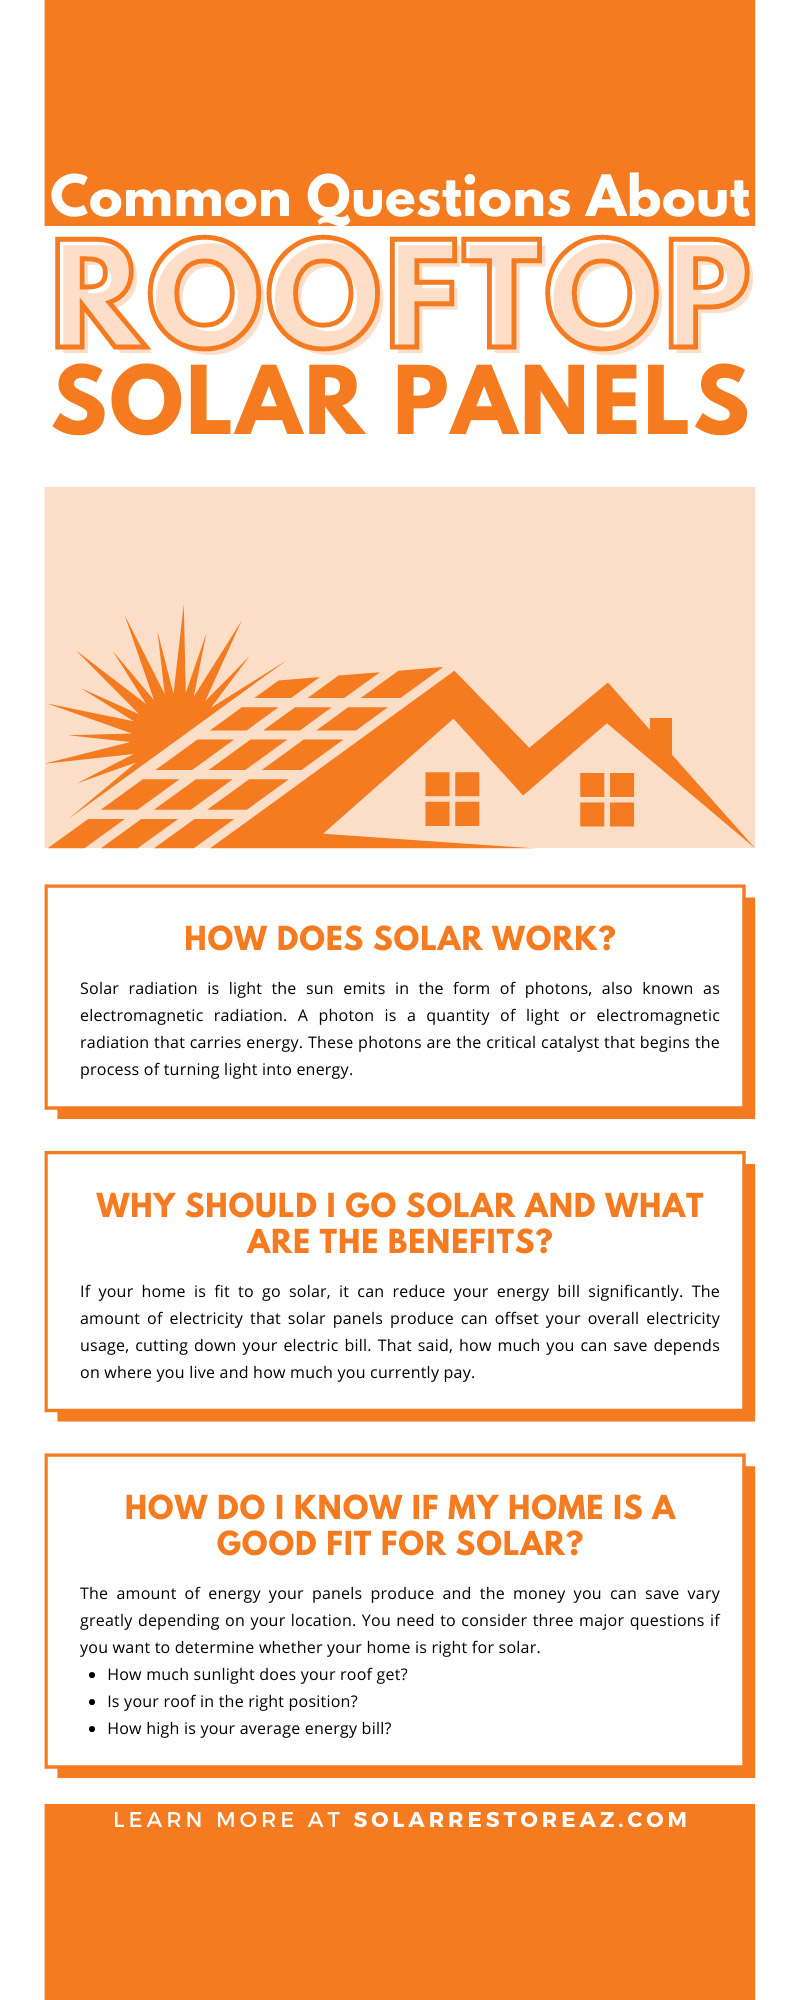 6 Common Questions About Rooftop Solar Panels